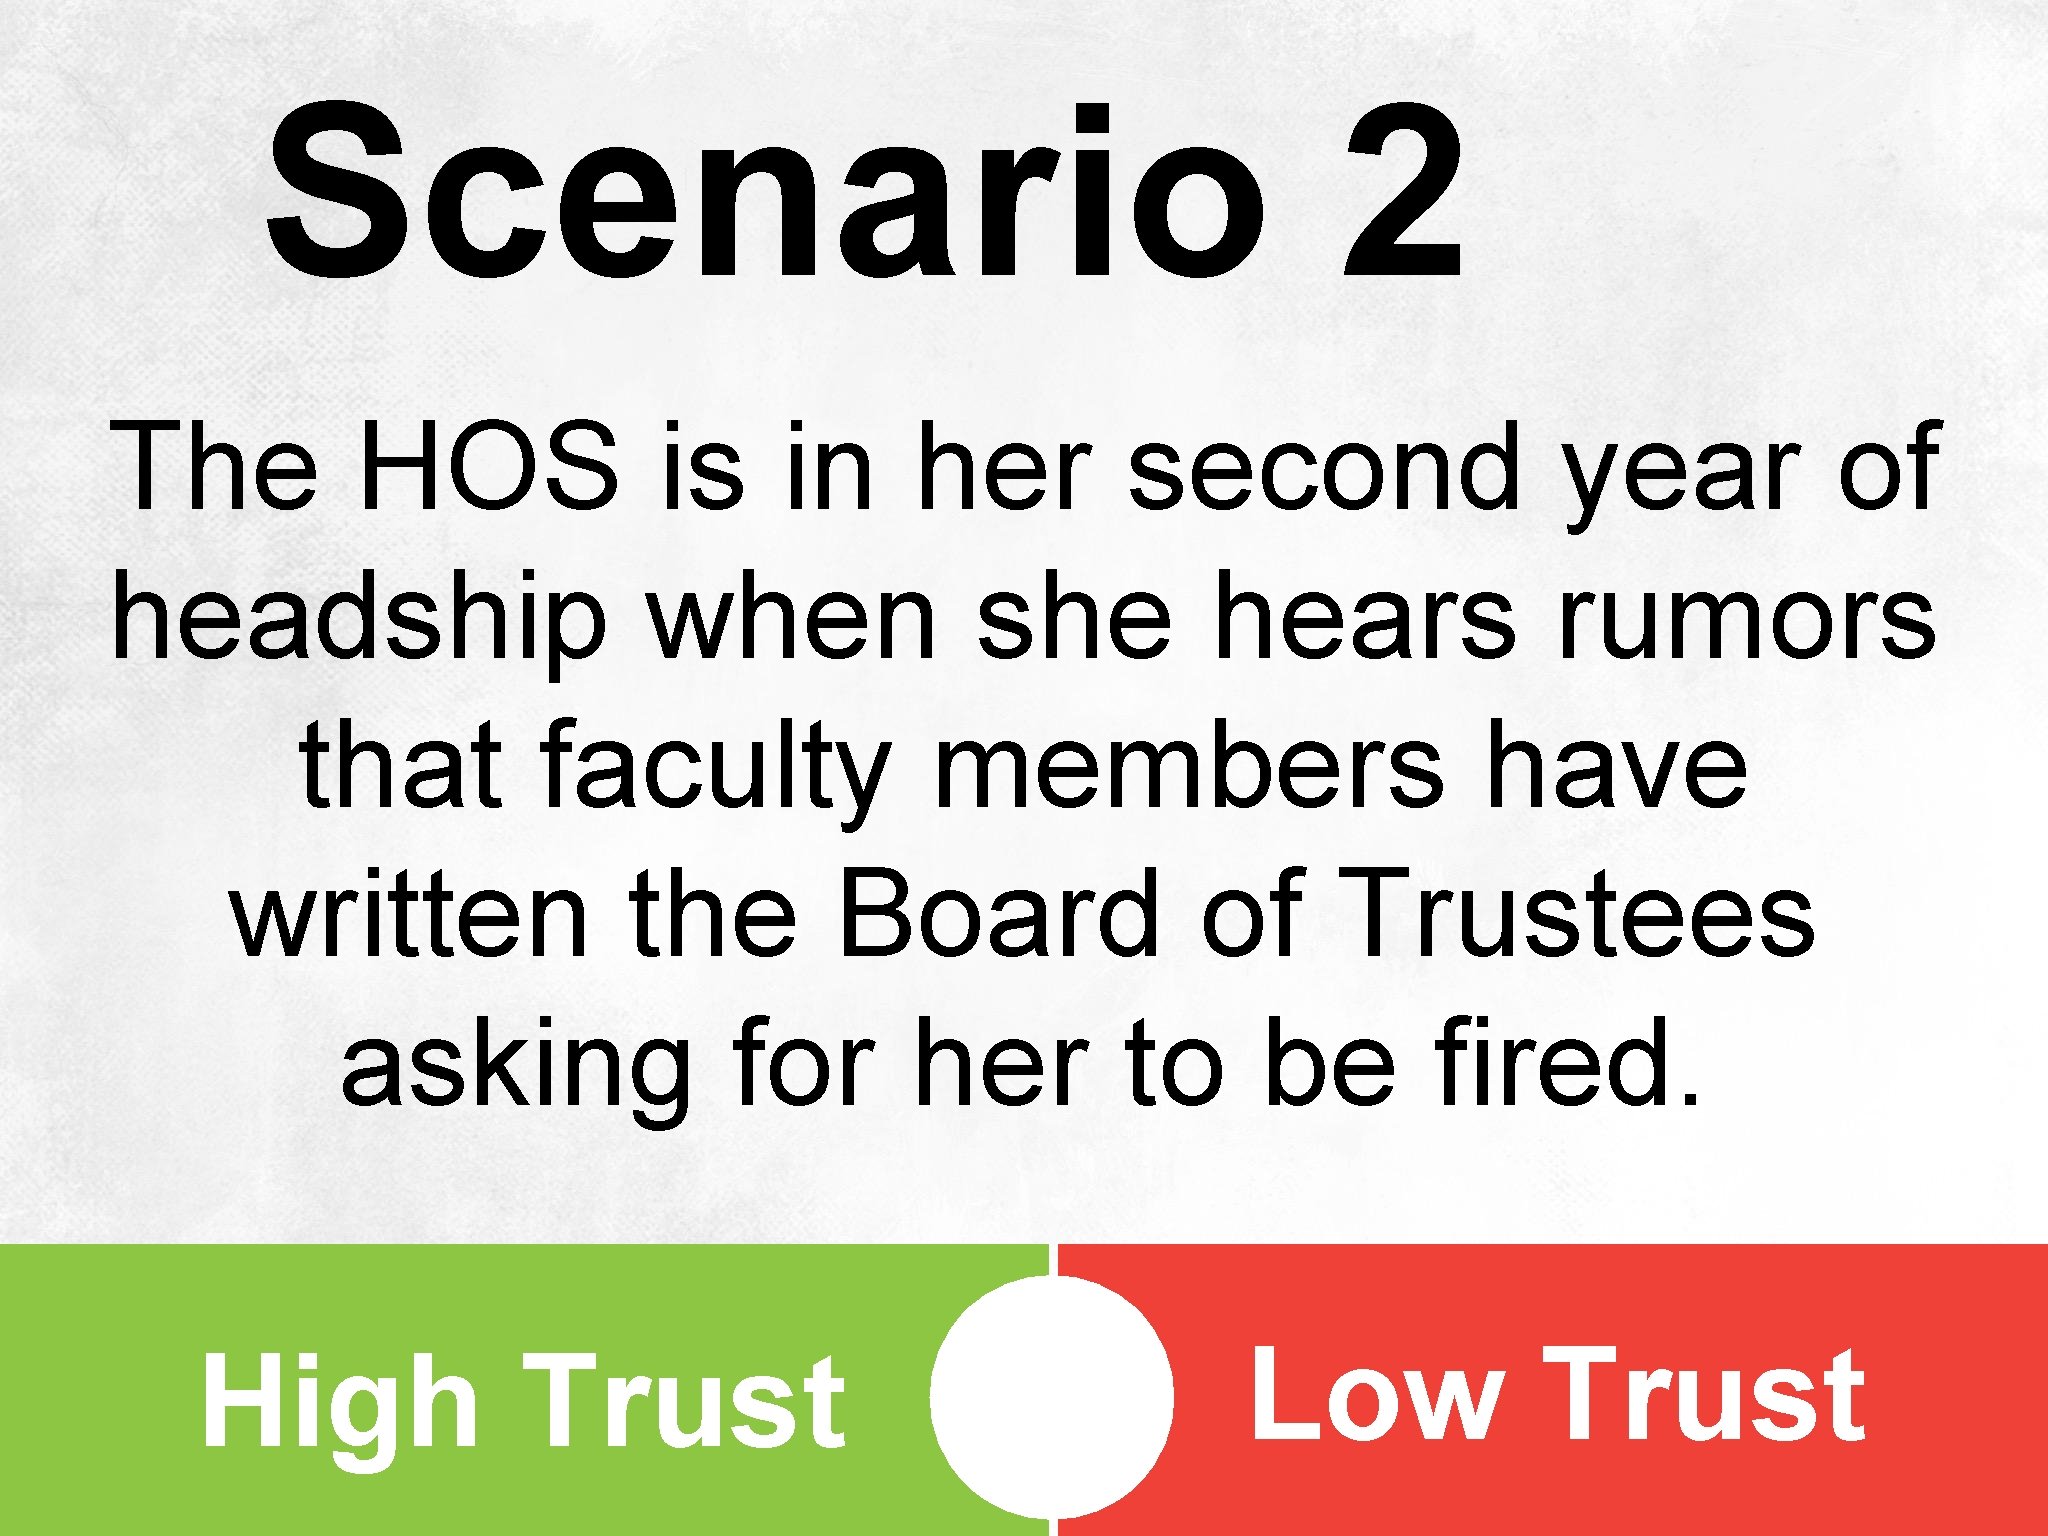 Scenario 2 The HOS is in her second year of headship when she hears